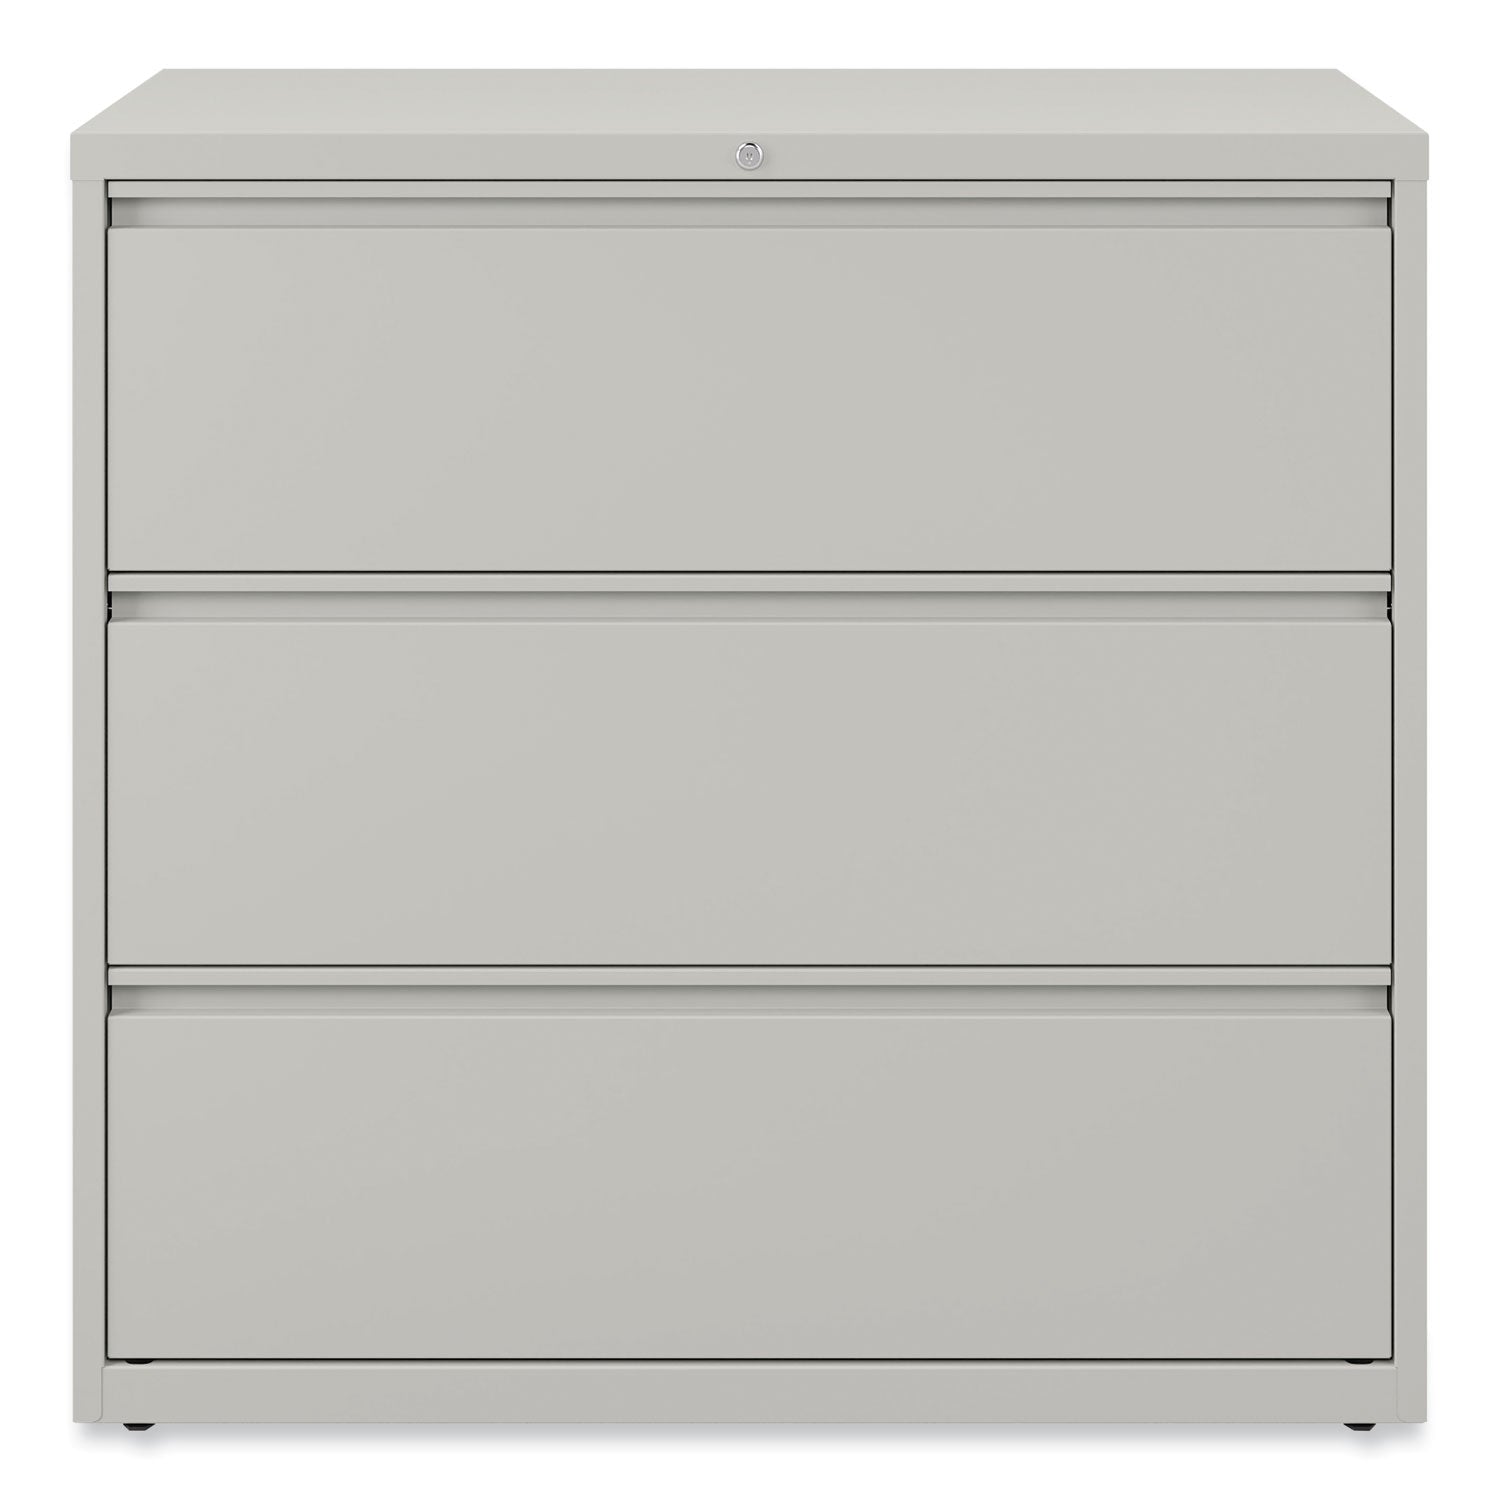 lateral-file-3-legal-letter-a4-a5-size-file-drawers-light-gray-42-x-1863-x-4025_alehlf4241lg - 8